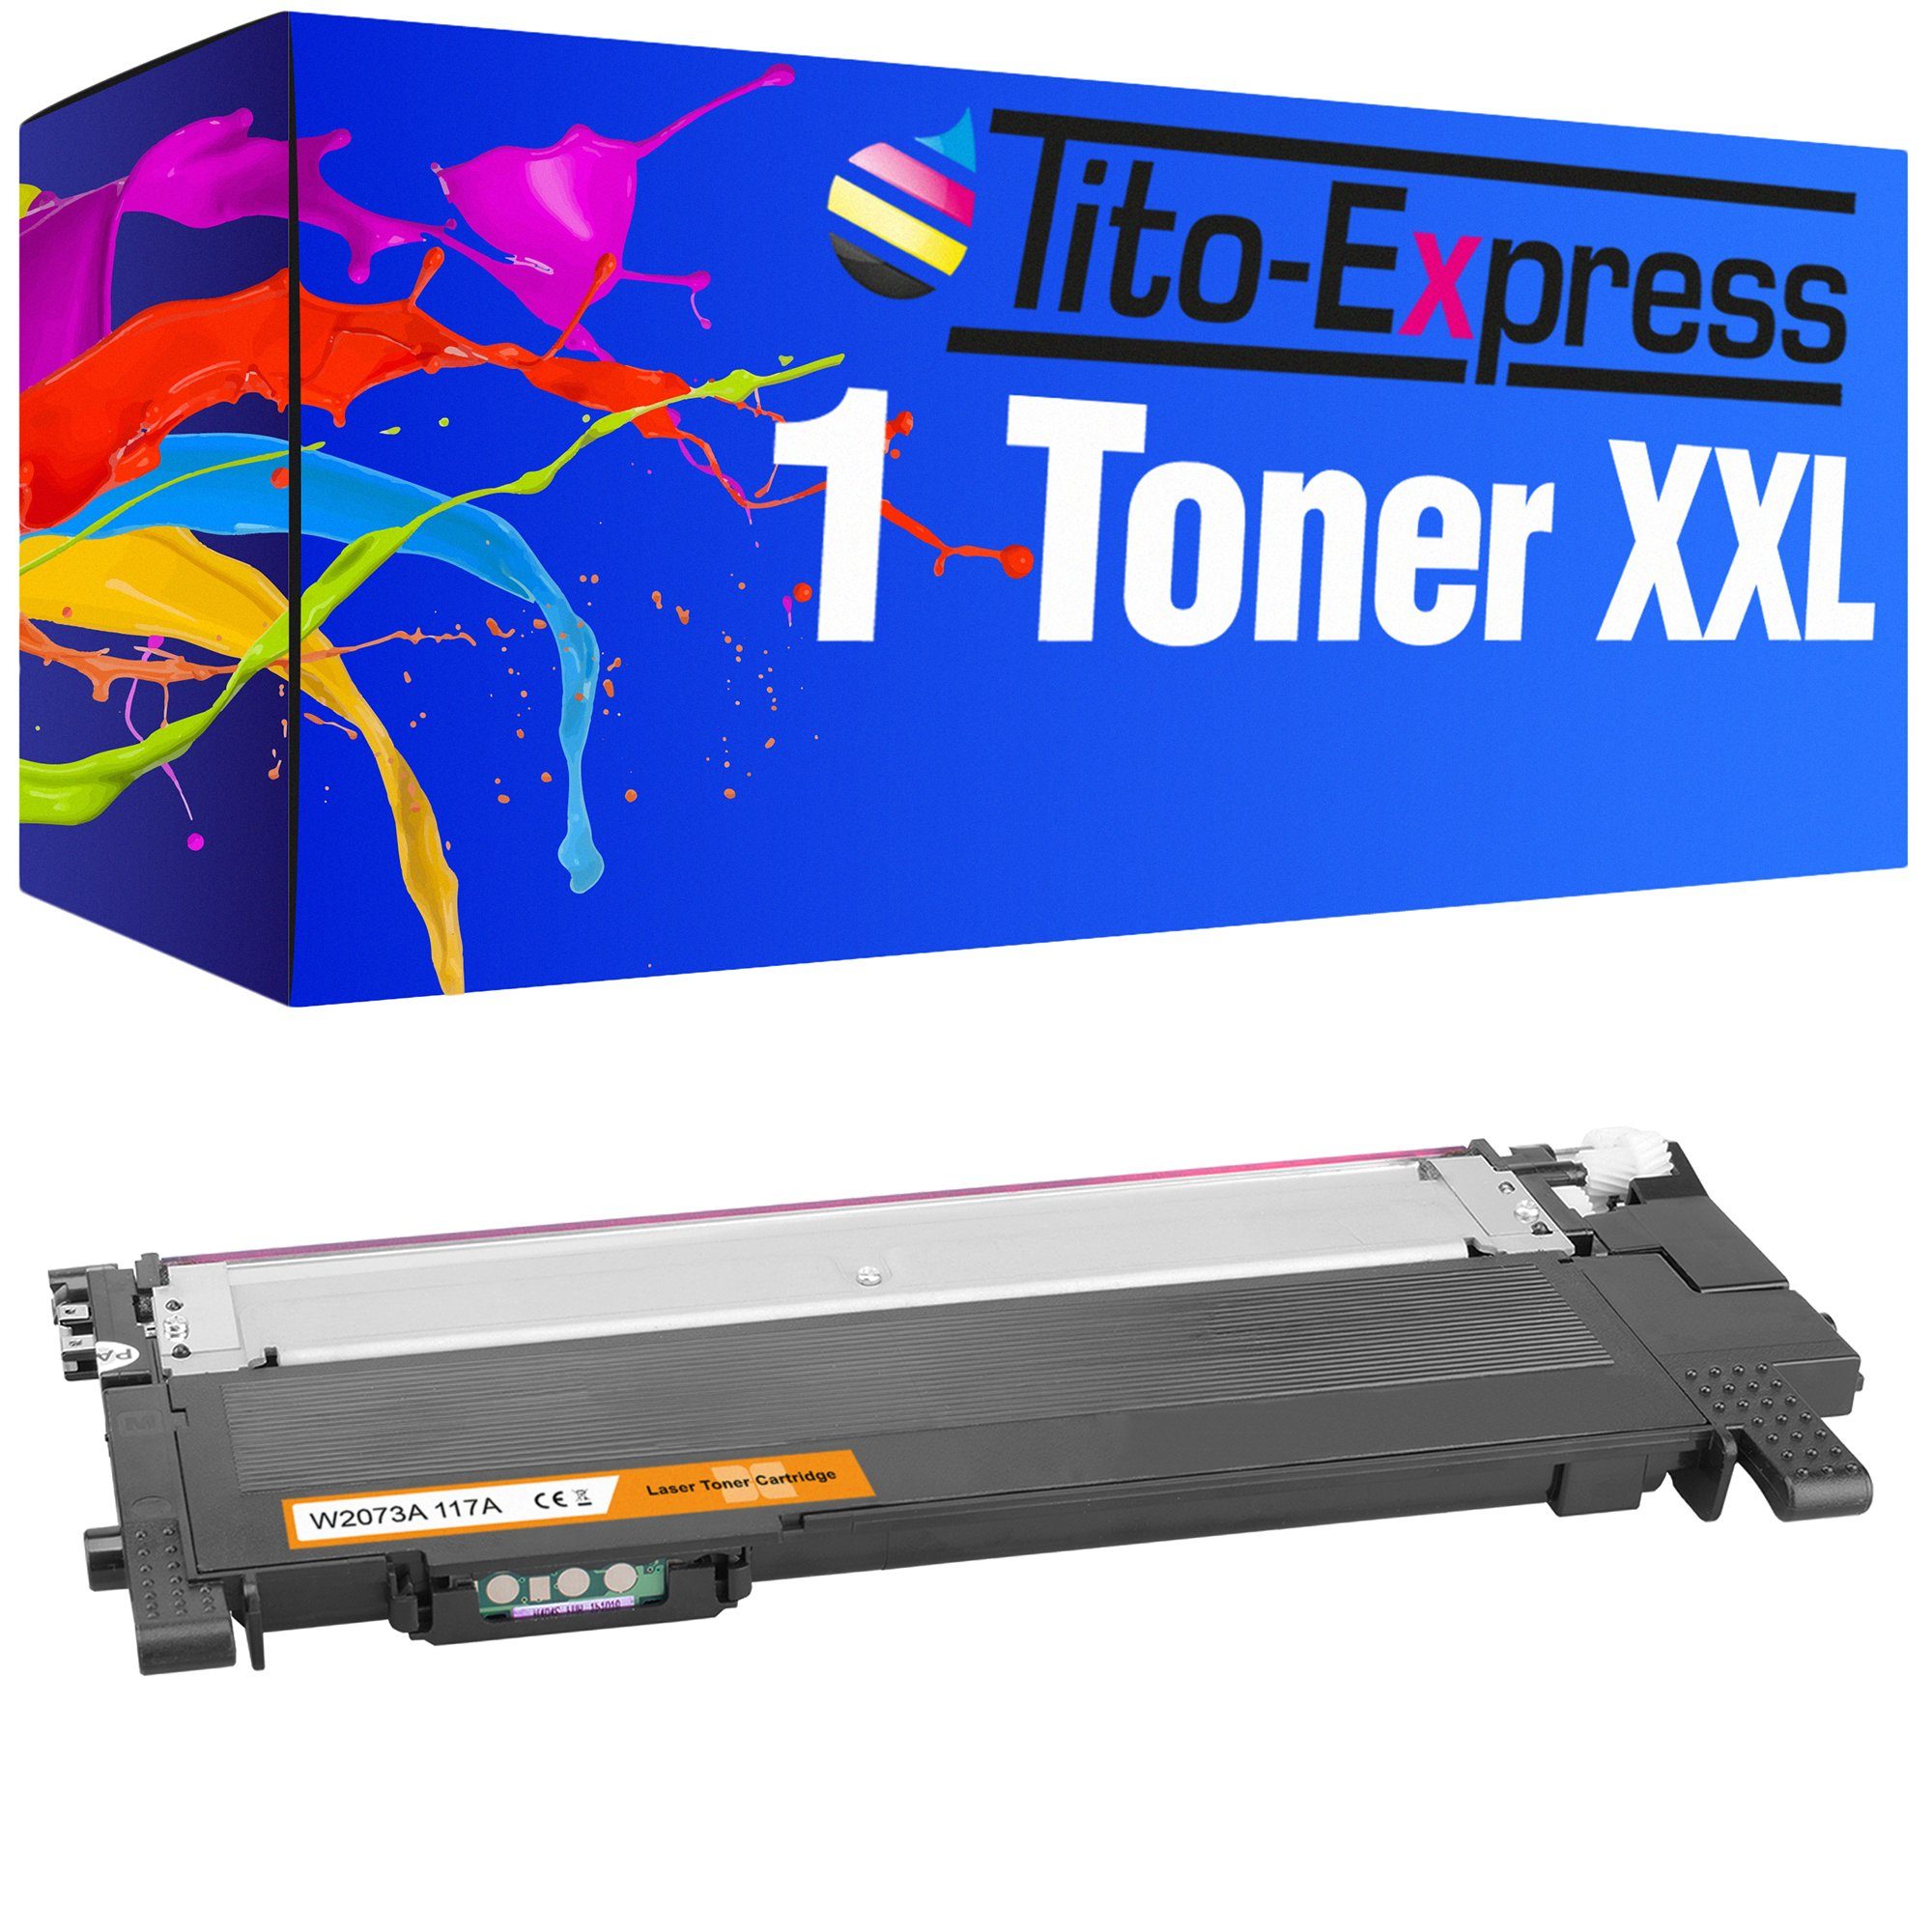 Tito-Express Tonerpatrone ersetzt HP HP 117A, für MFP 178nw Magenta), Color 179fnw MFP-170 (1x 150a 178nwg W 179fwg Laser 150nw A 2070 W2070A